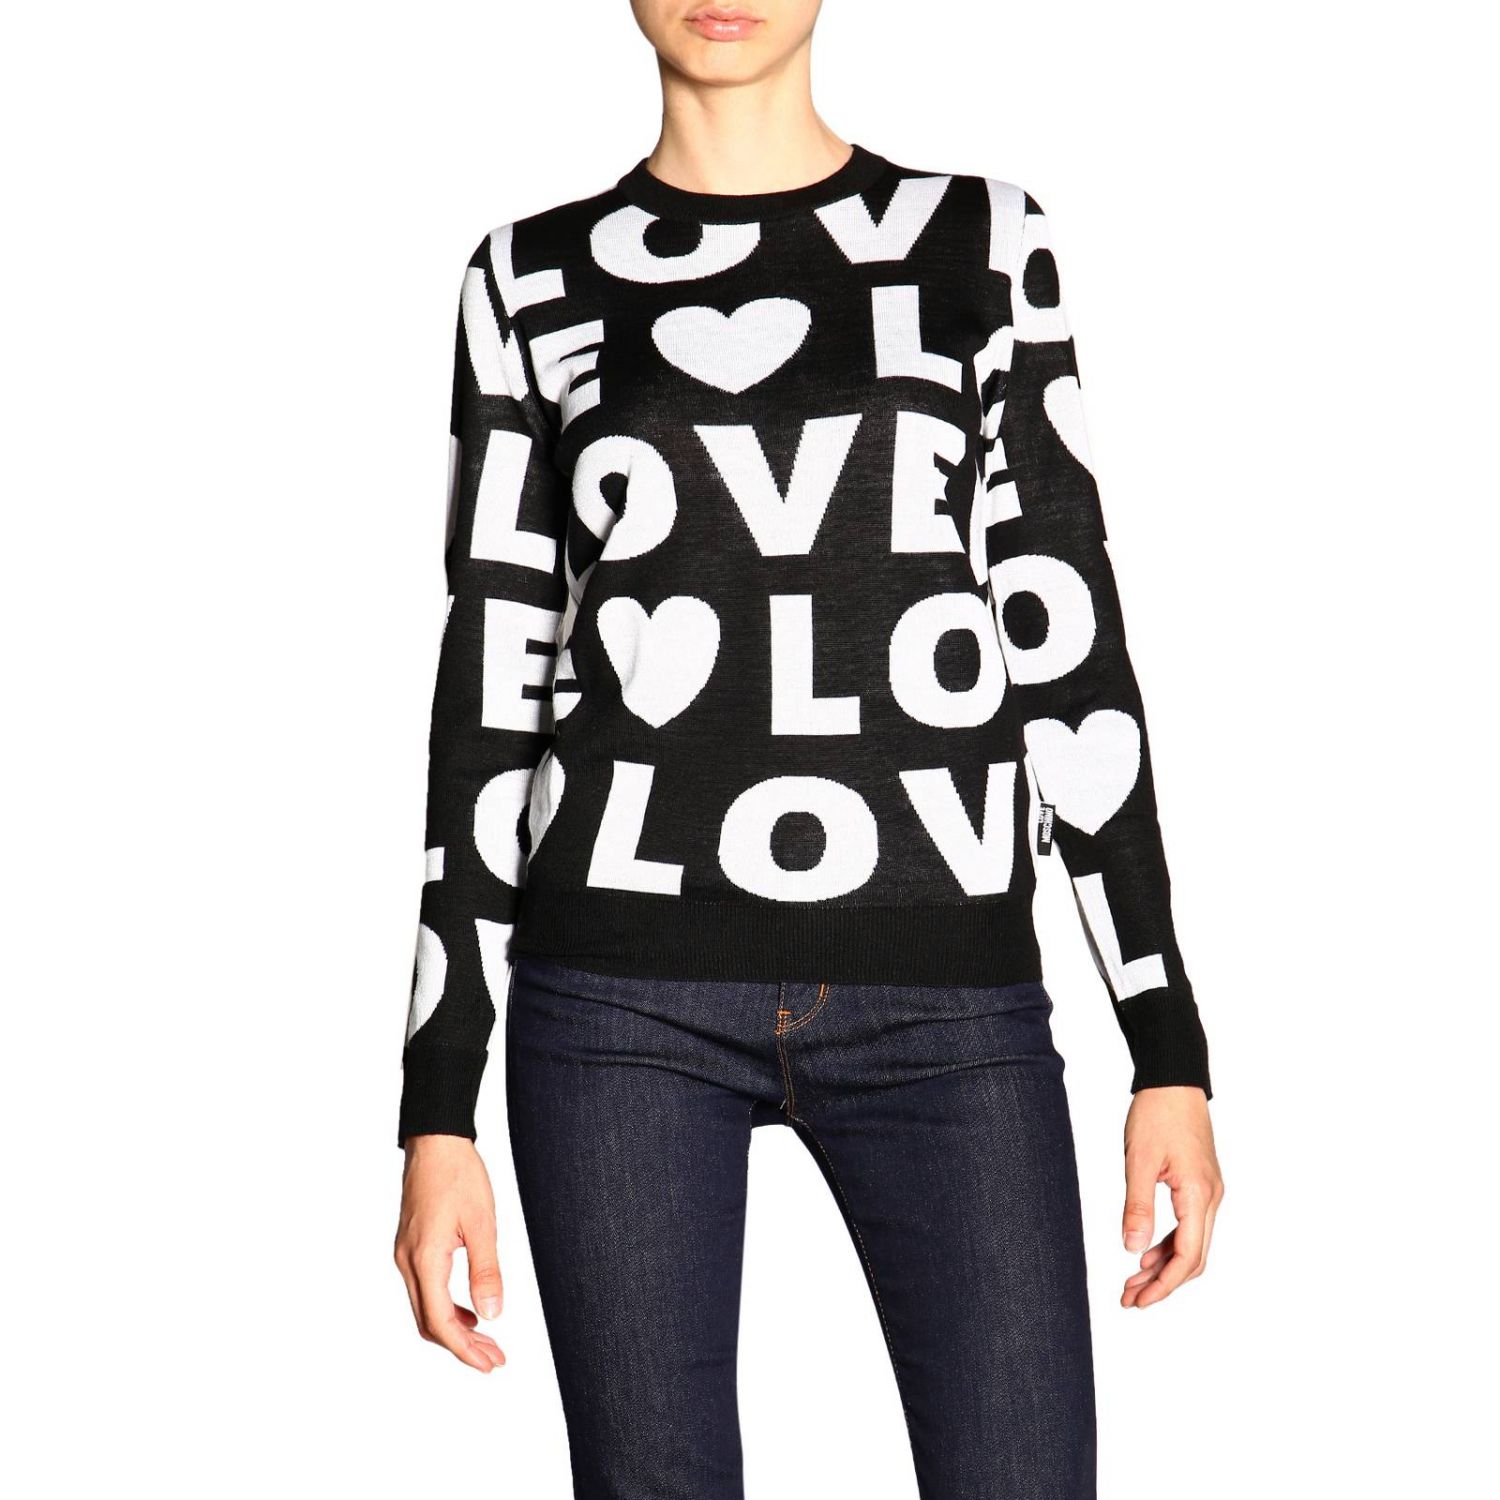 Love Moschino Outlet: jumper for women - Black | Love Moschino jumper ...